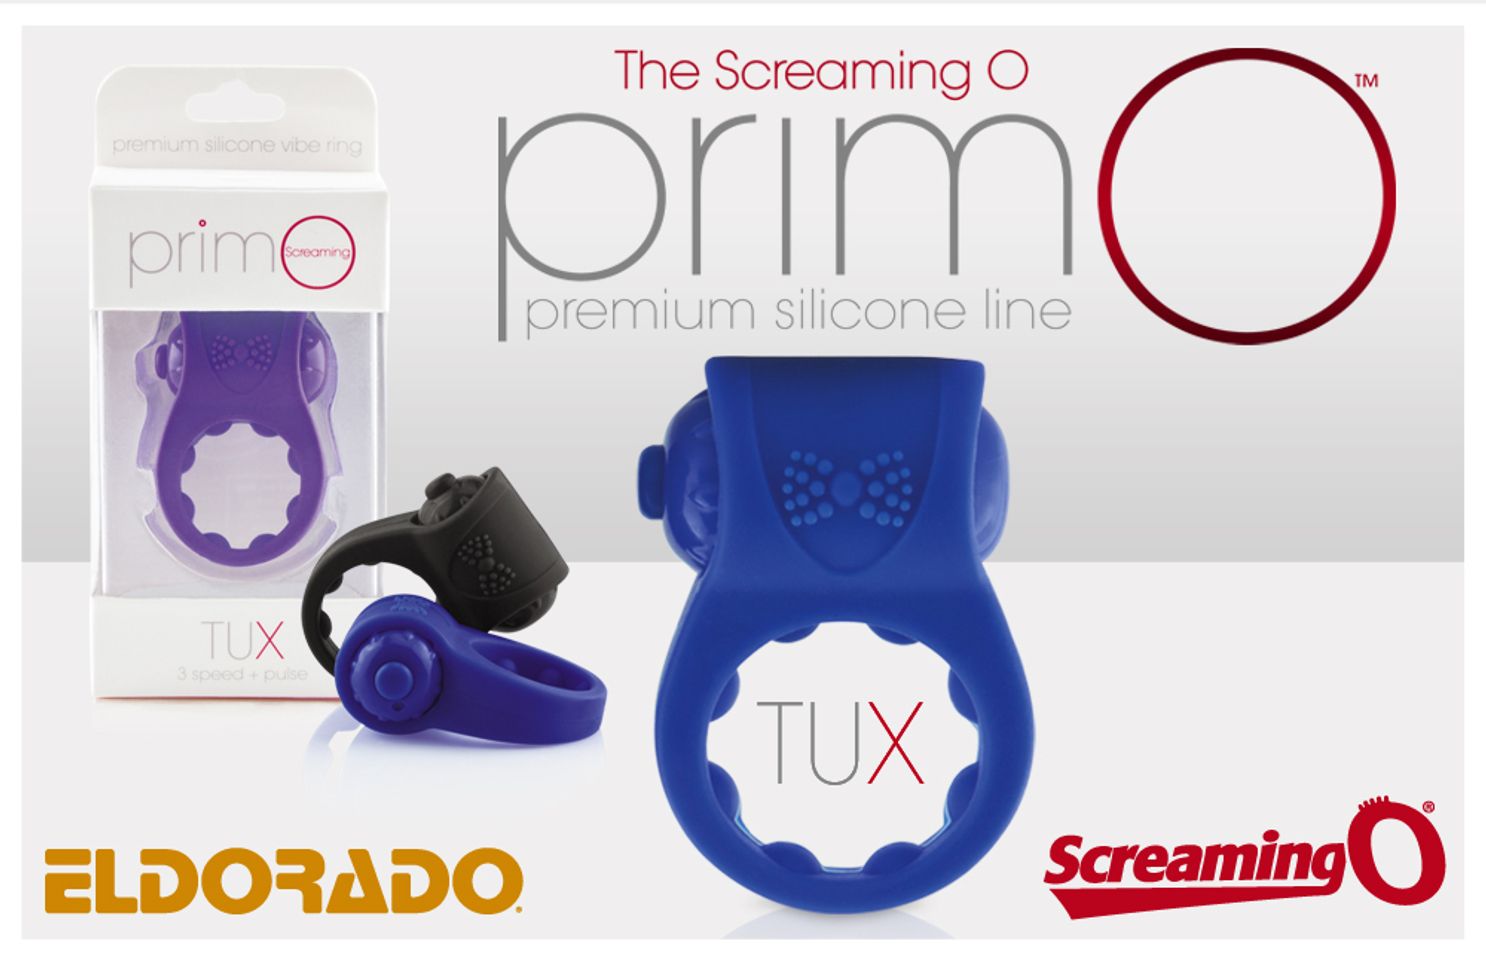 The Screaming O's PrimO Tux Available from Eldorado in June Exclusive